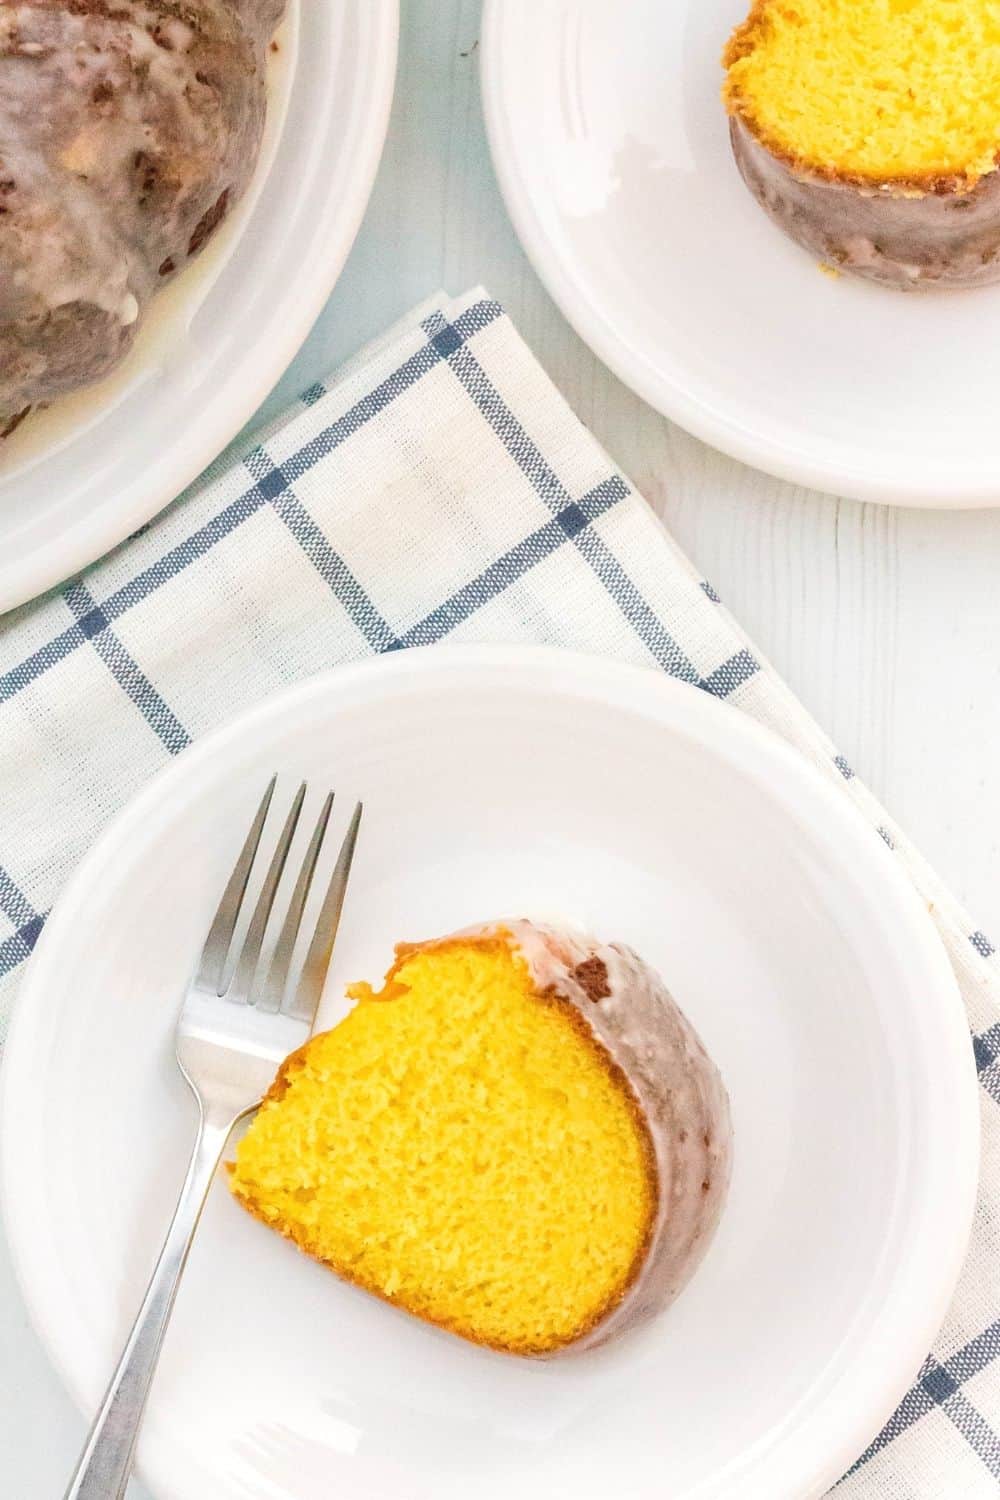 aerial view of a slice of cake mix lemon cake on a white plate, with another slice and the remaining cake in the background.